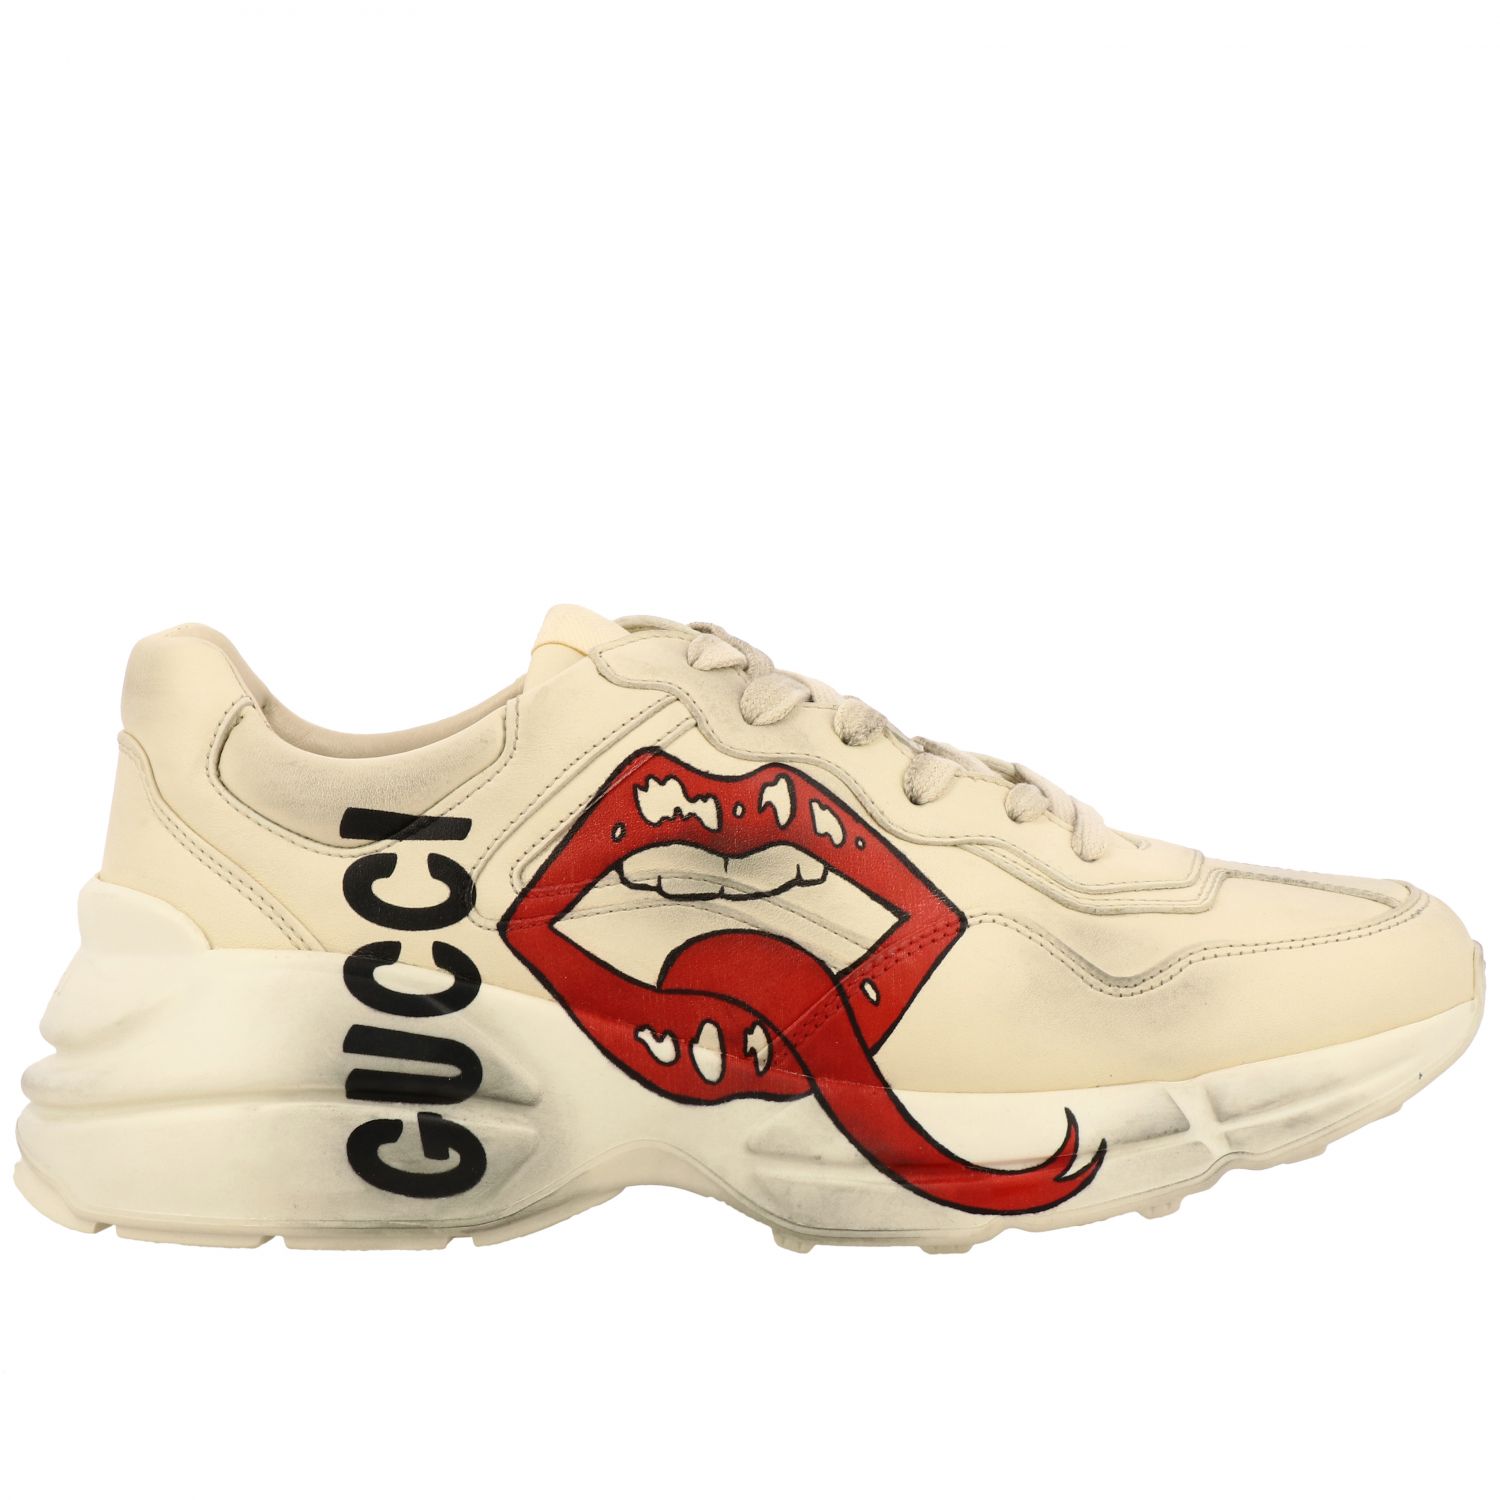 GUCCI: Rhyton leather sneakers with maxi mouth - White | Gucci sneakers